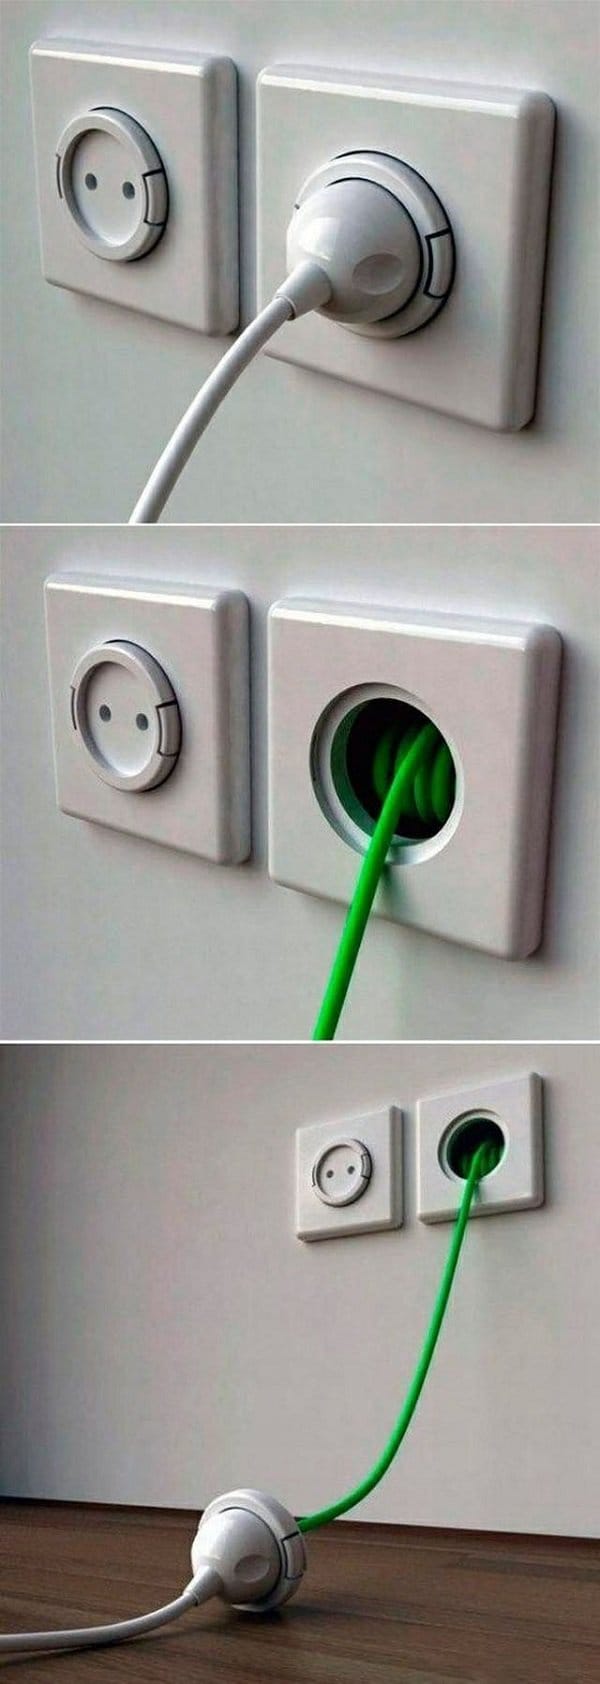 http://www.awesomeinventions.com/wp-content/uploads/2014/11/socket-extension-lead.jpg